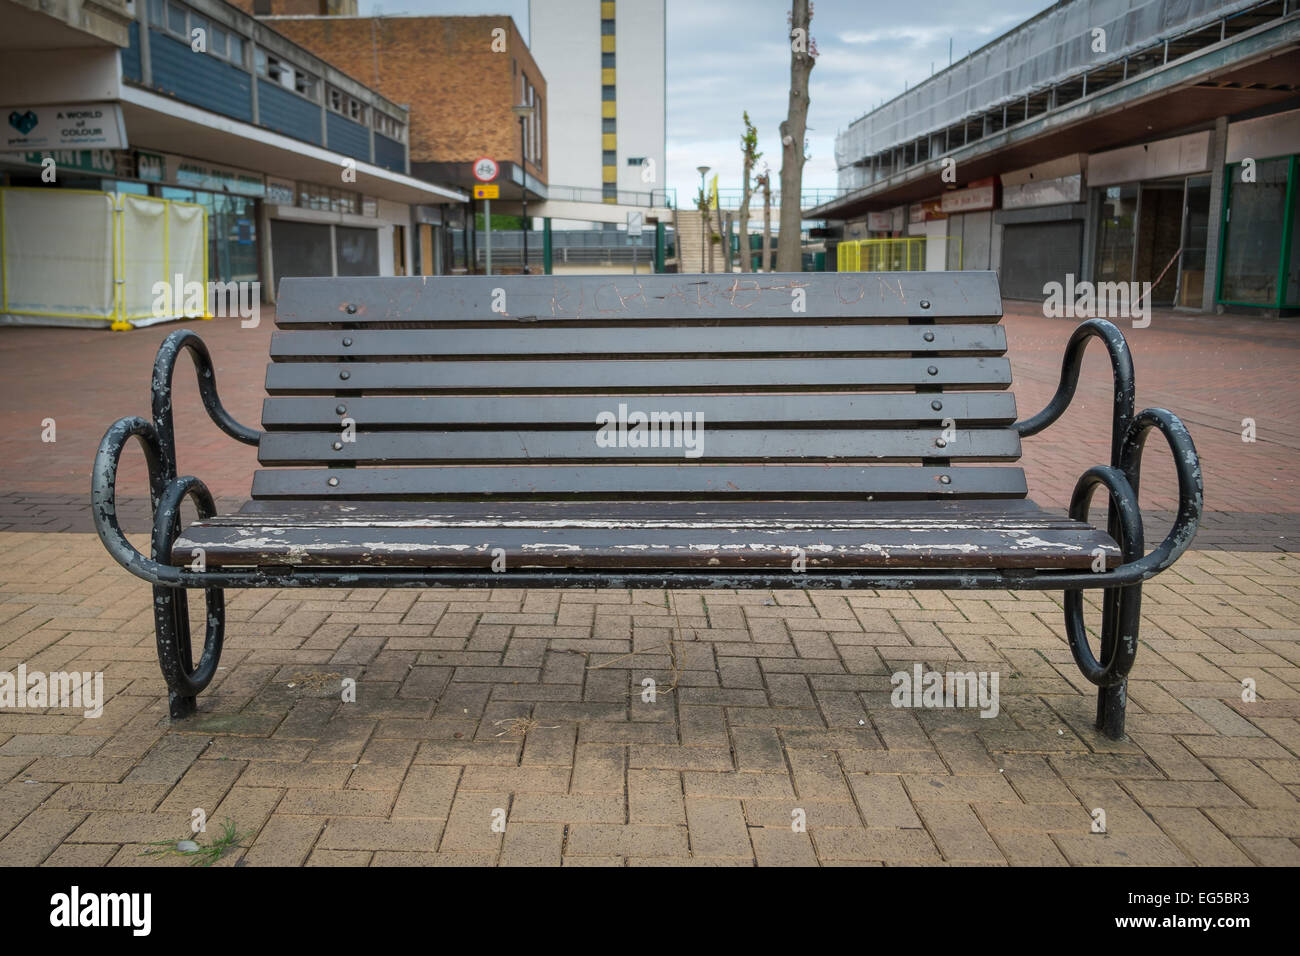 BRACKNELL, UK - AUGUST 11, 2013: A bench in an empty highstreet in the Berkshire town of Bracknell. Awaiting demolition to make Stock Photo